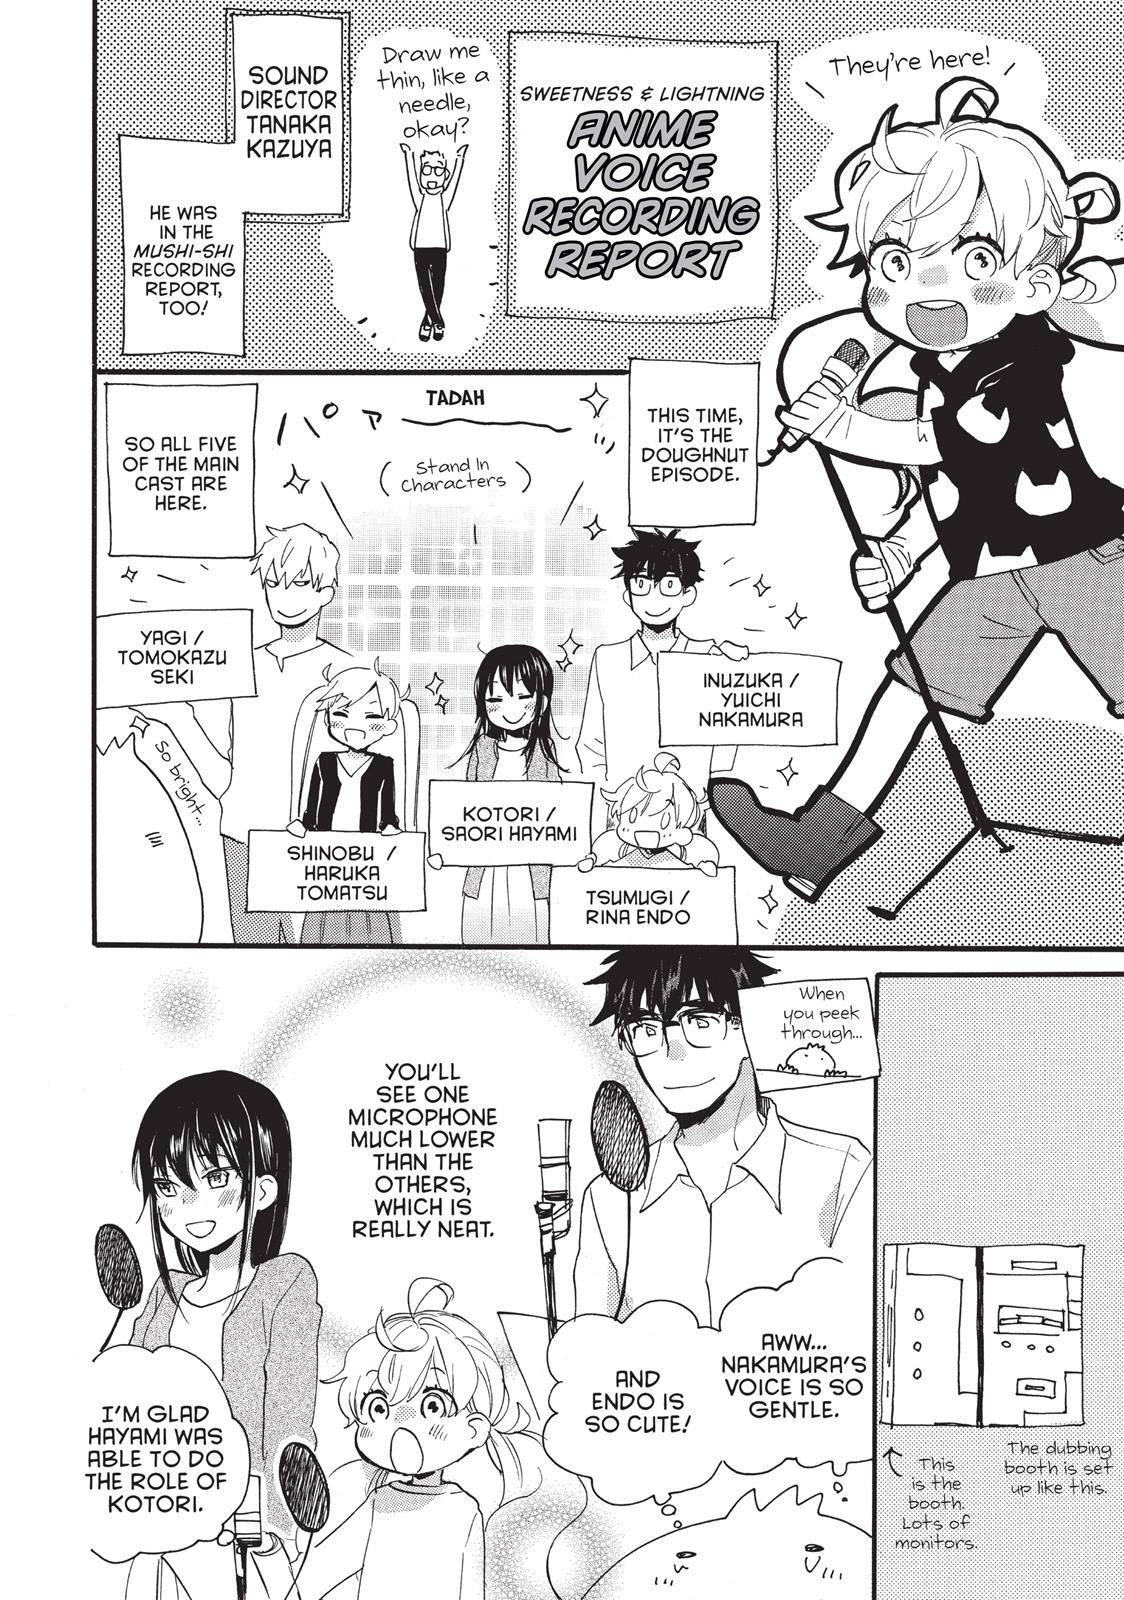 Sweetness And Lightning - chapter 39.5 - #1